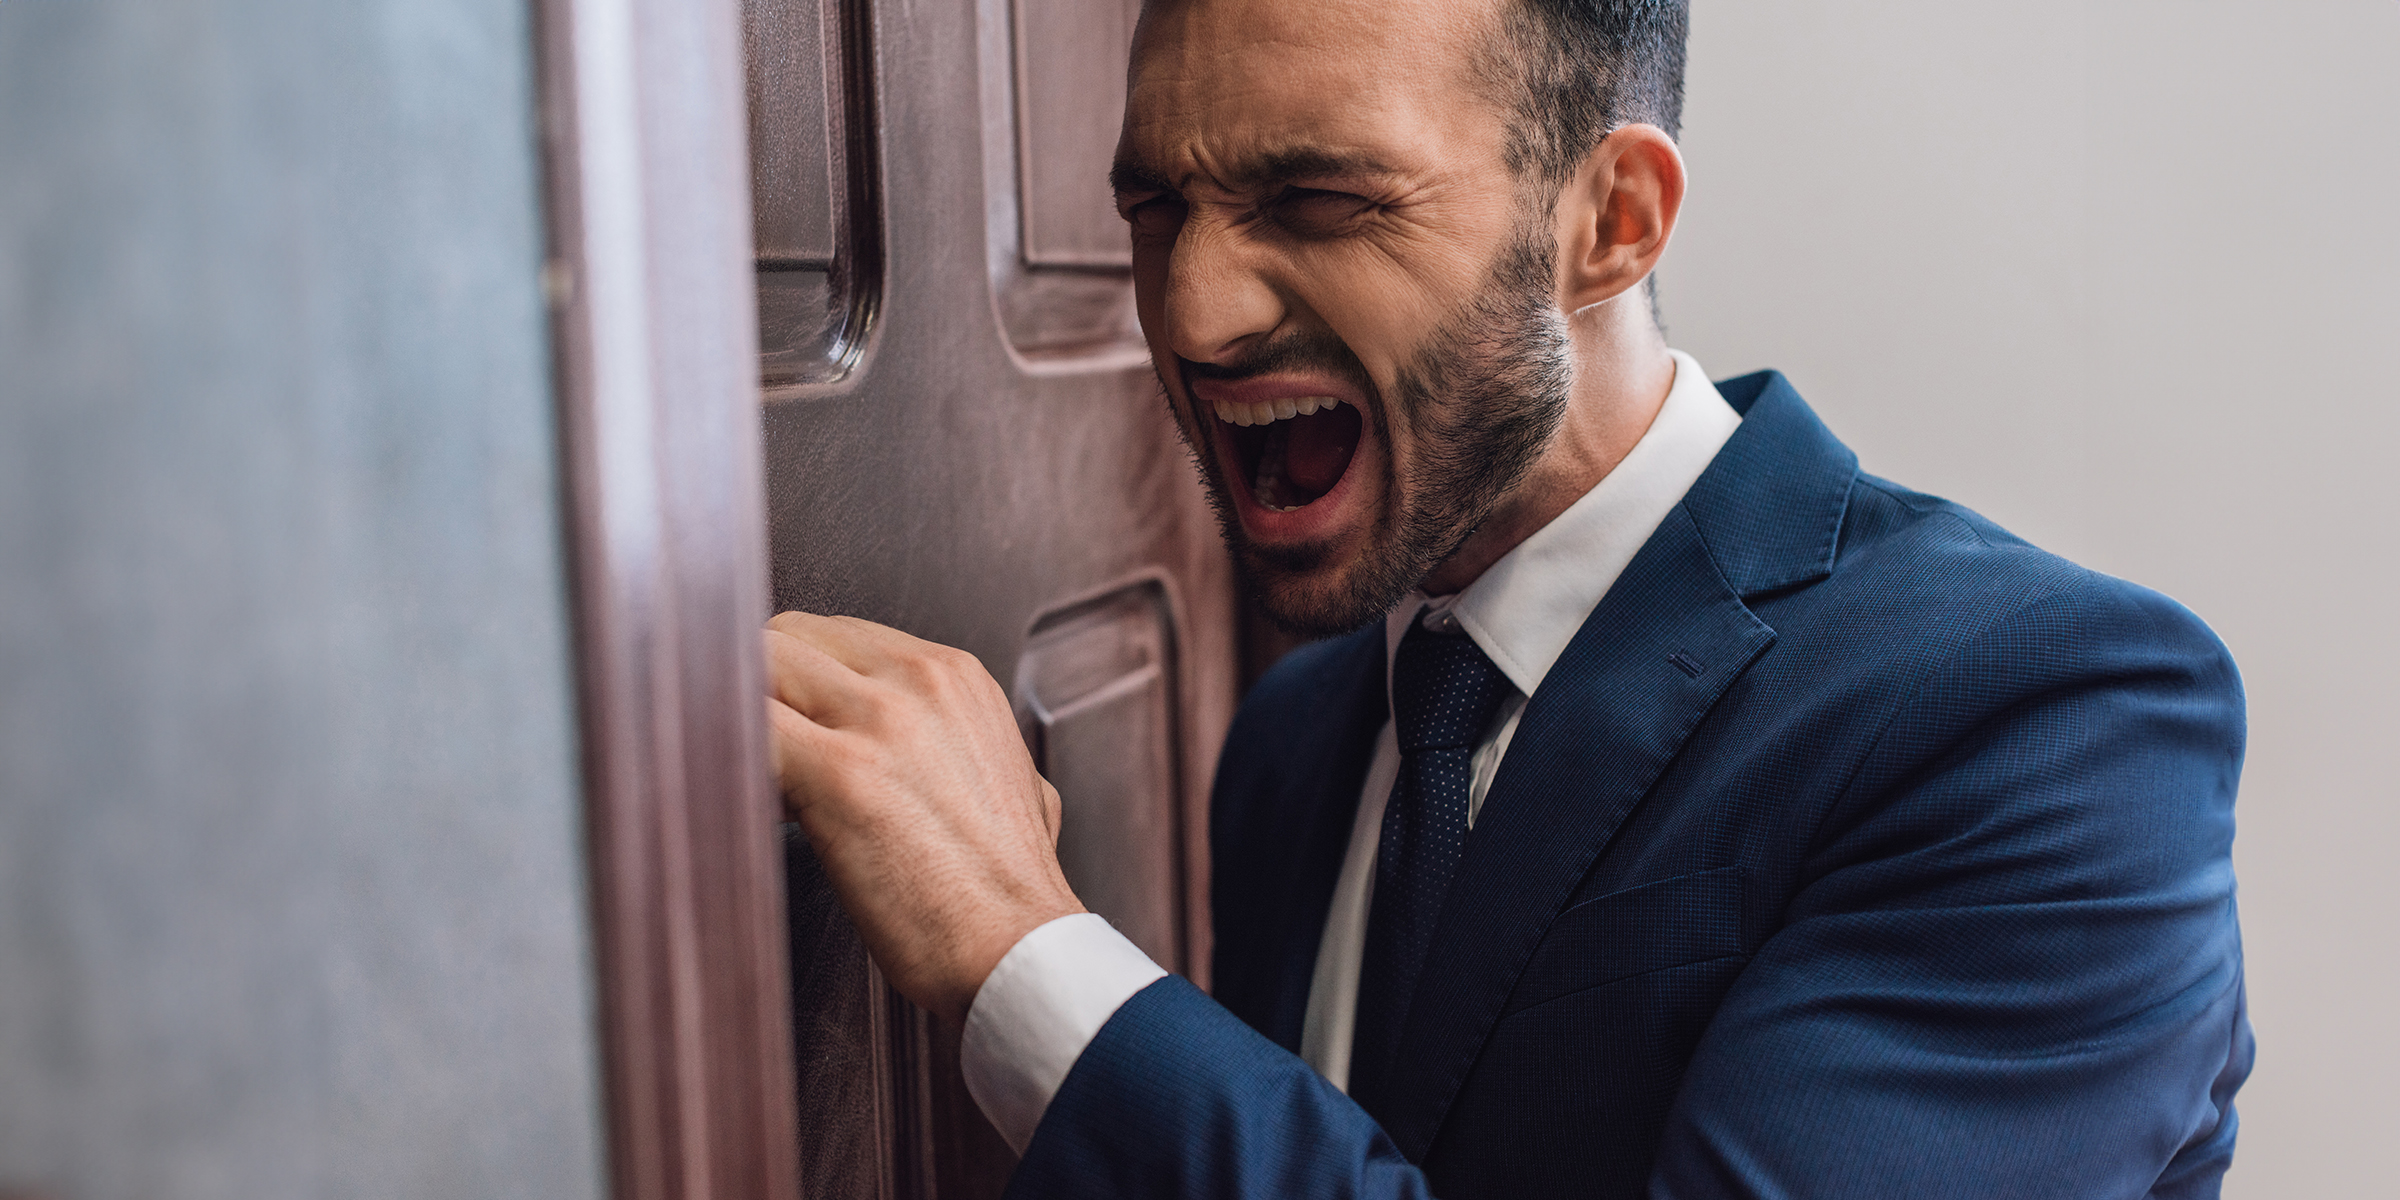 An angry man knocking on a door | Source: Shutterstock